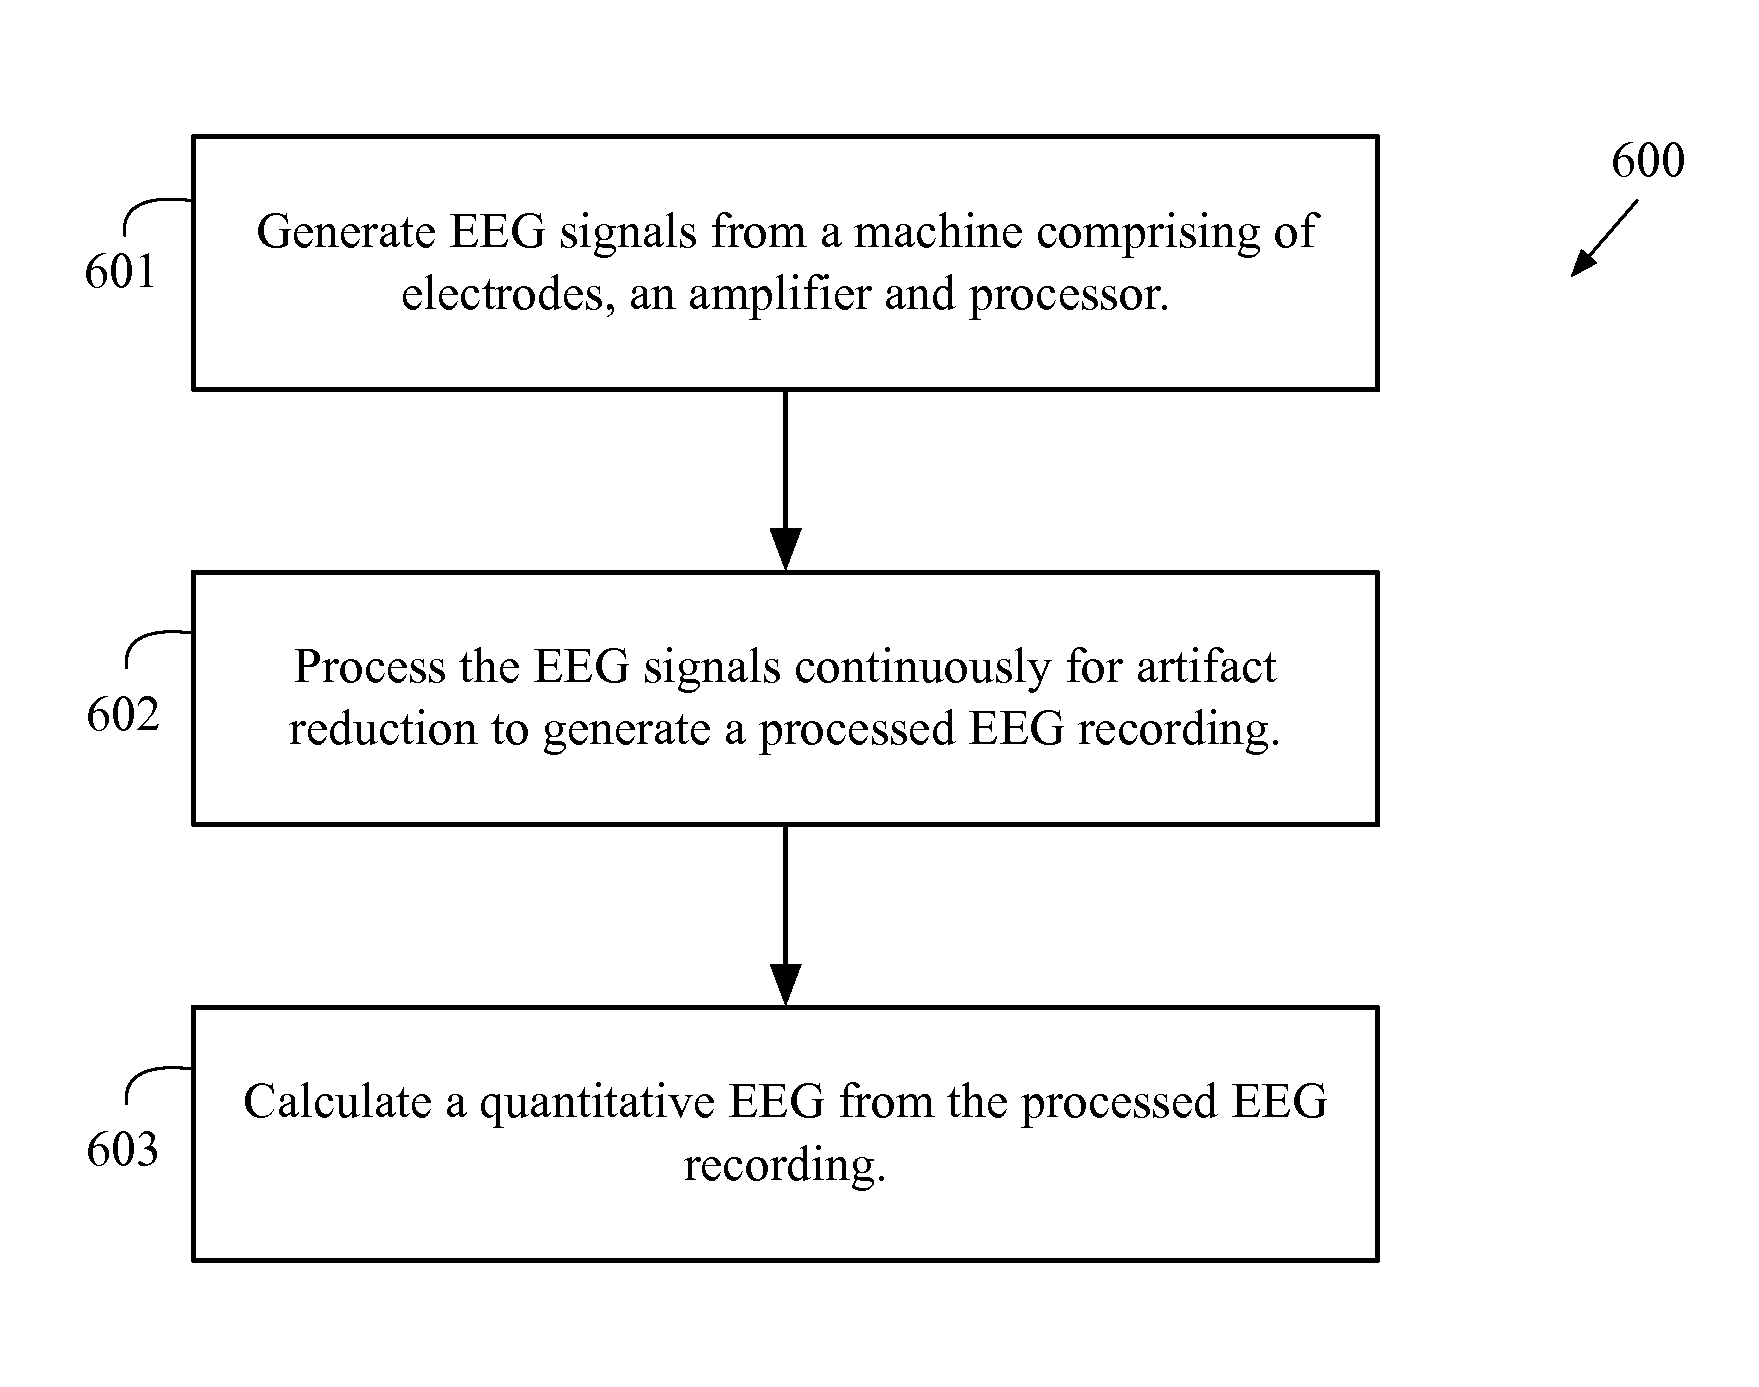 Method And System To Calculate qEEG